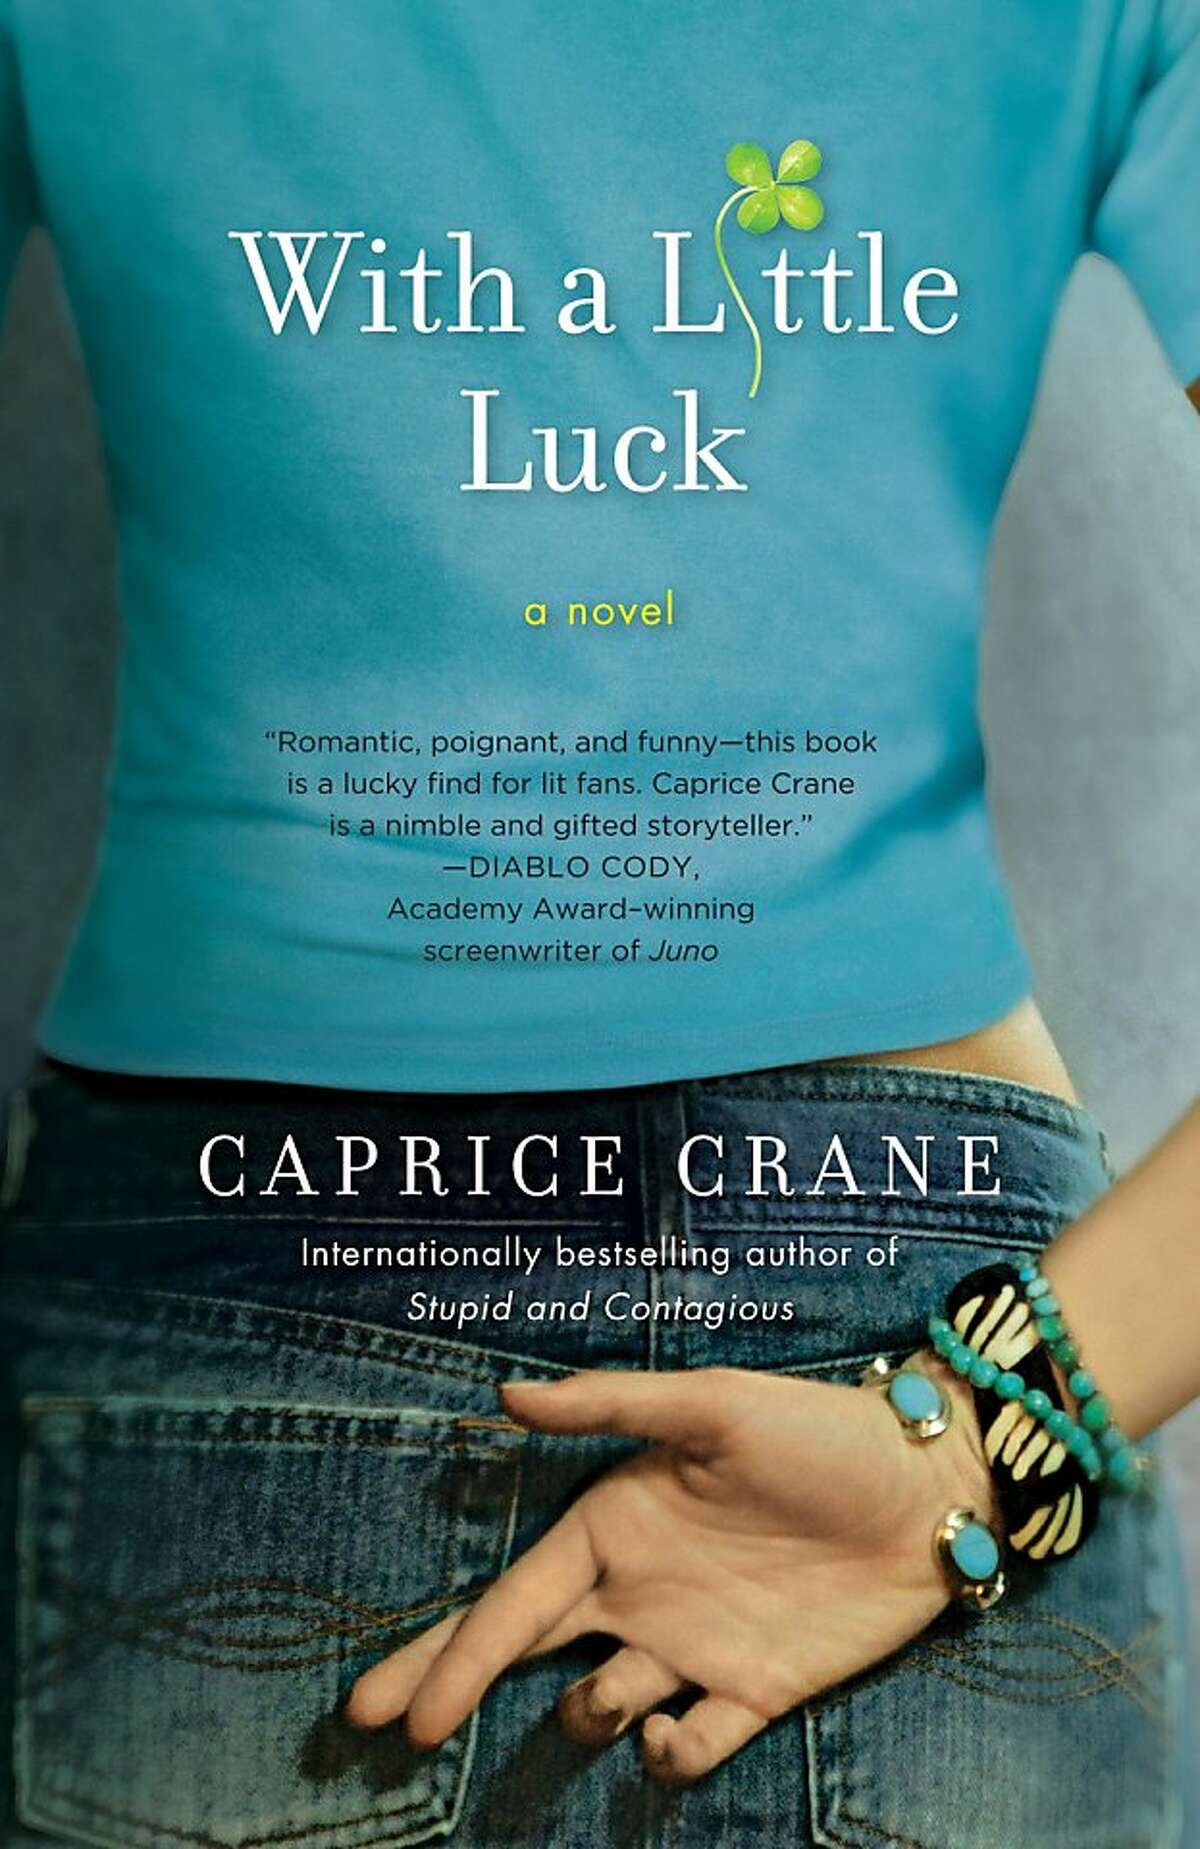 Caprice Crane's "With a Little Luck"